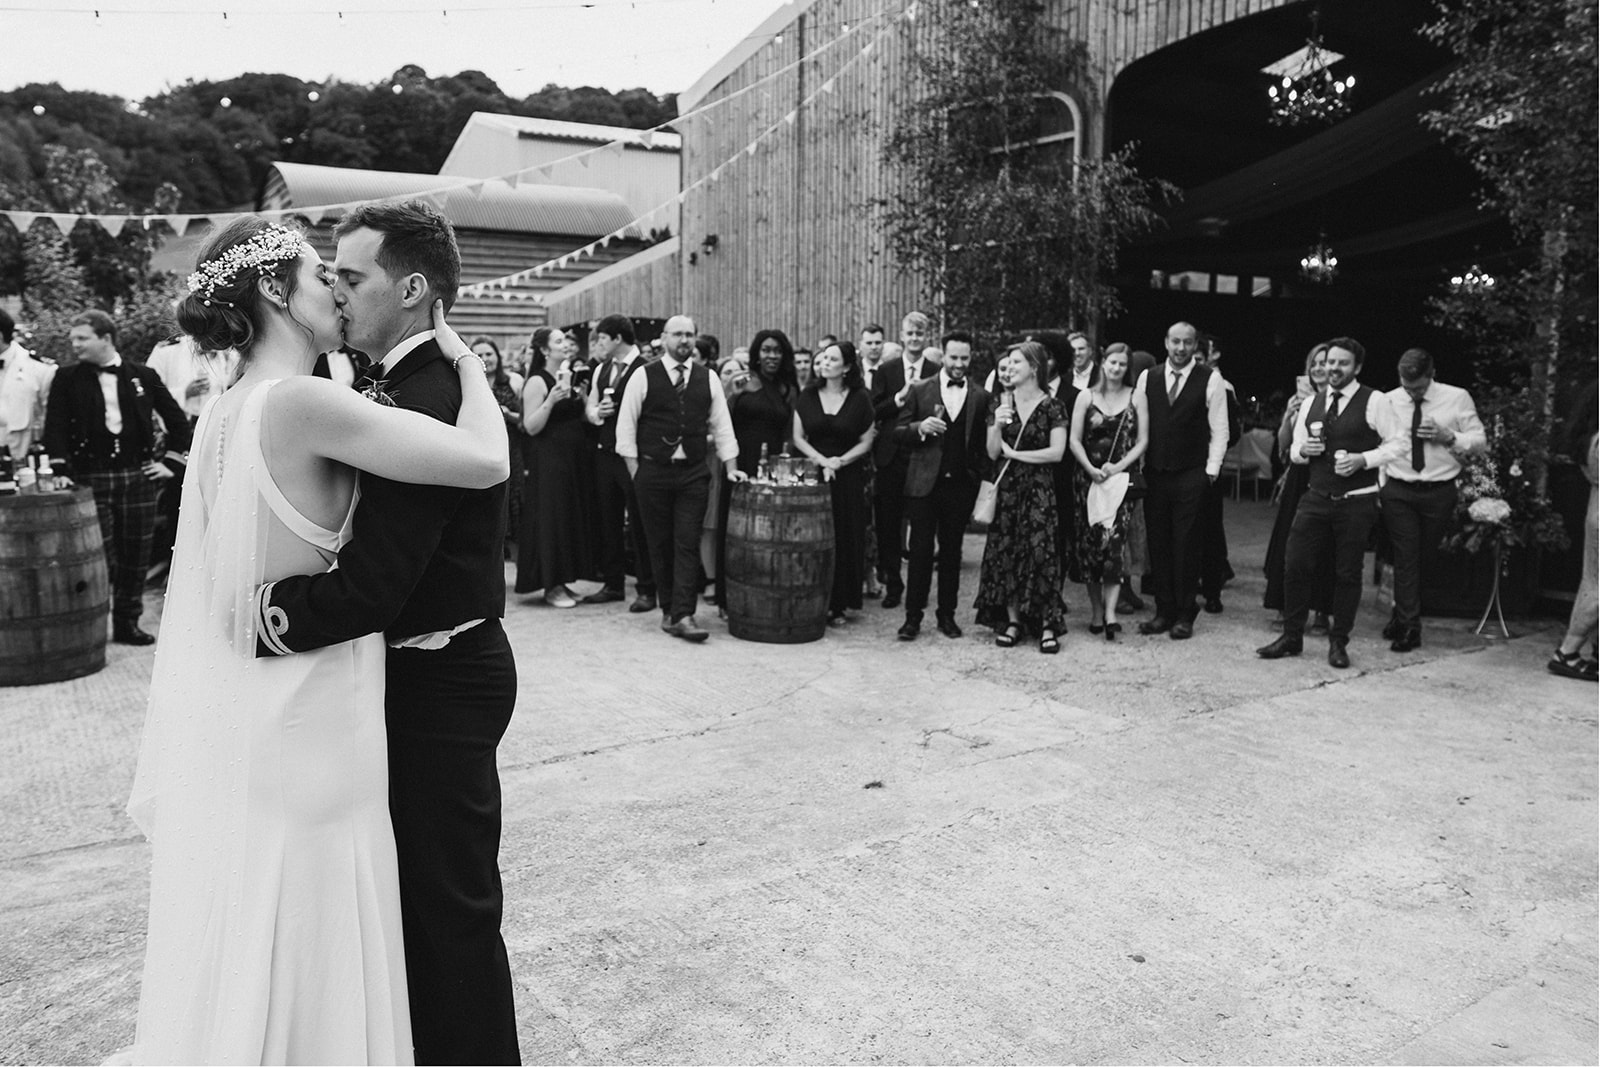 Derby DIY Farm Wedding Photography - bride and groom kiss during the first dance outside in the farm courtyard
